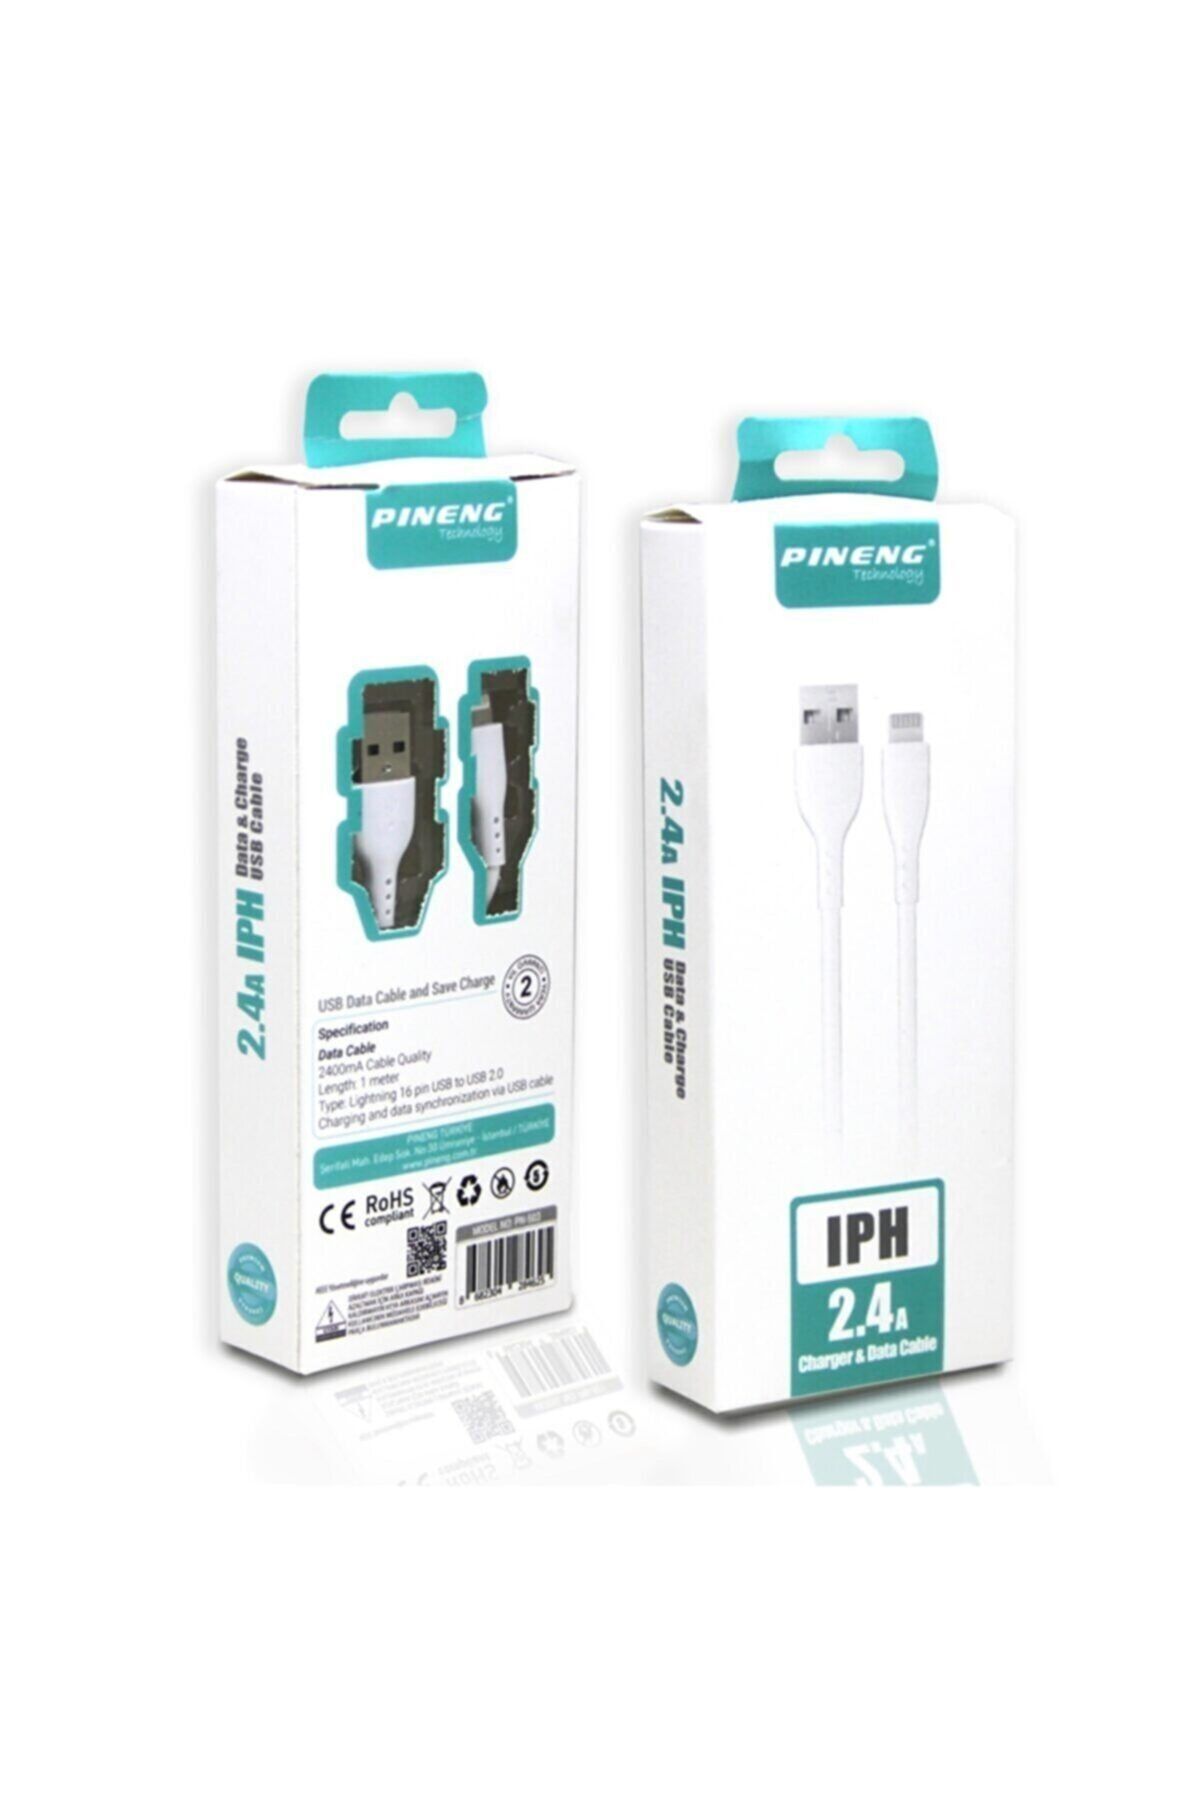 Pineng 2.4a Iph Data&charge Usb Cable